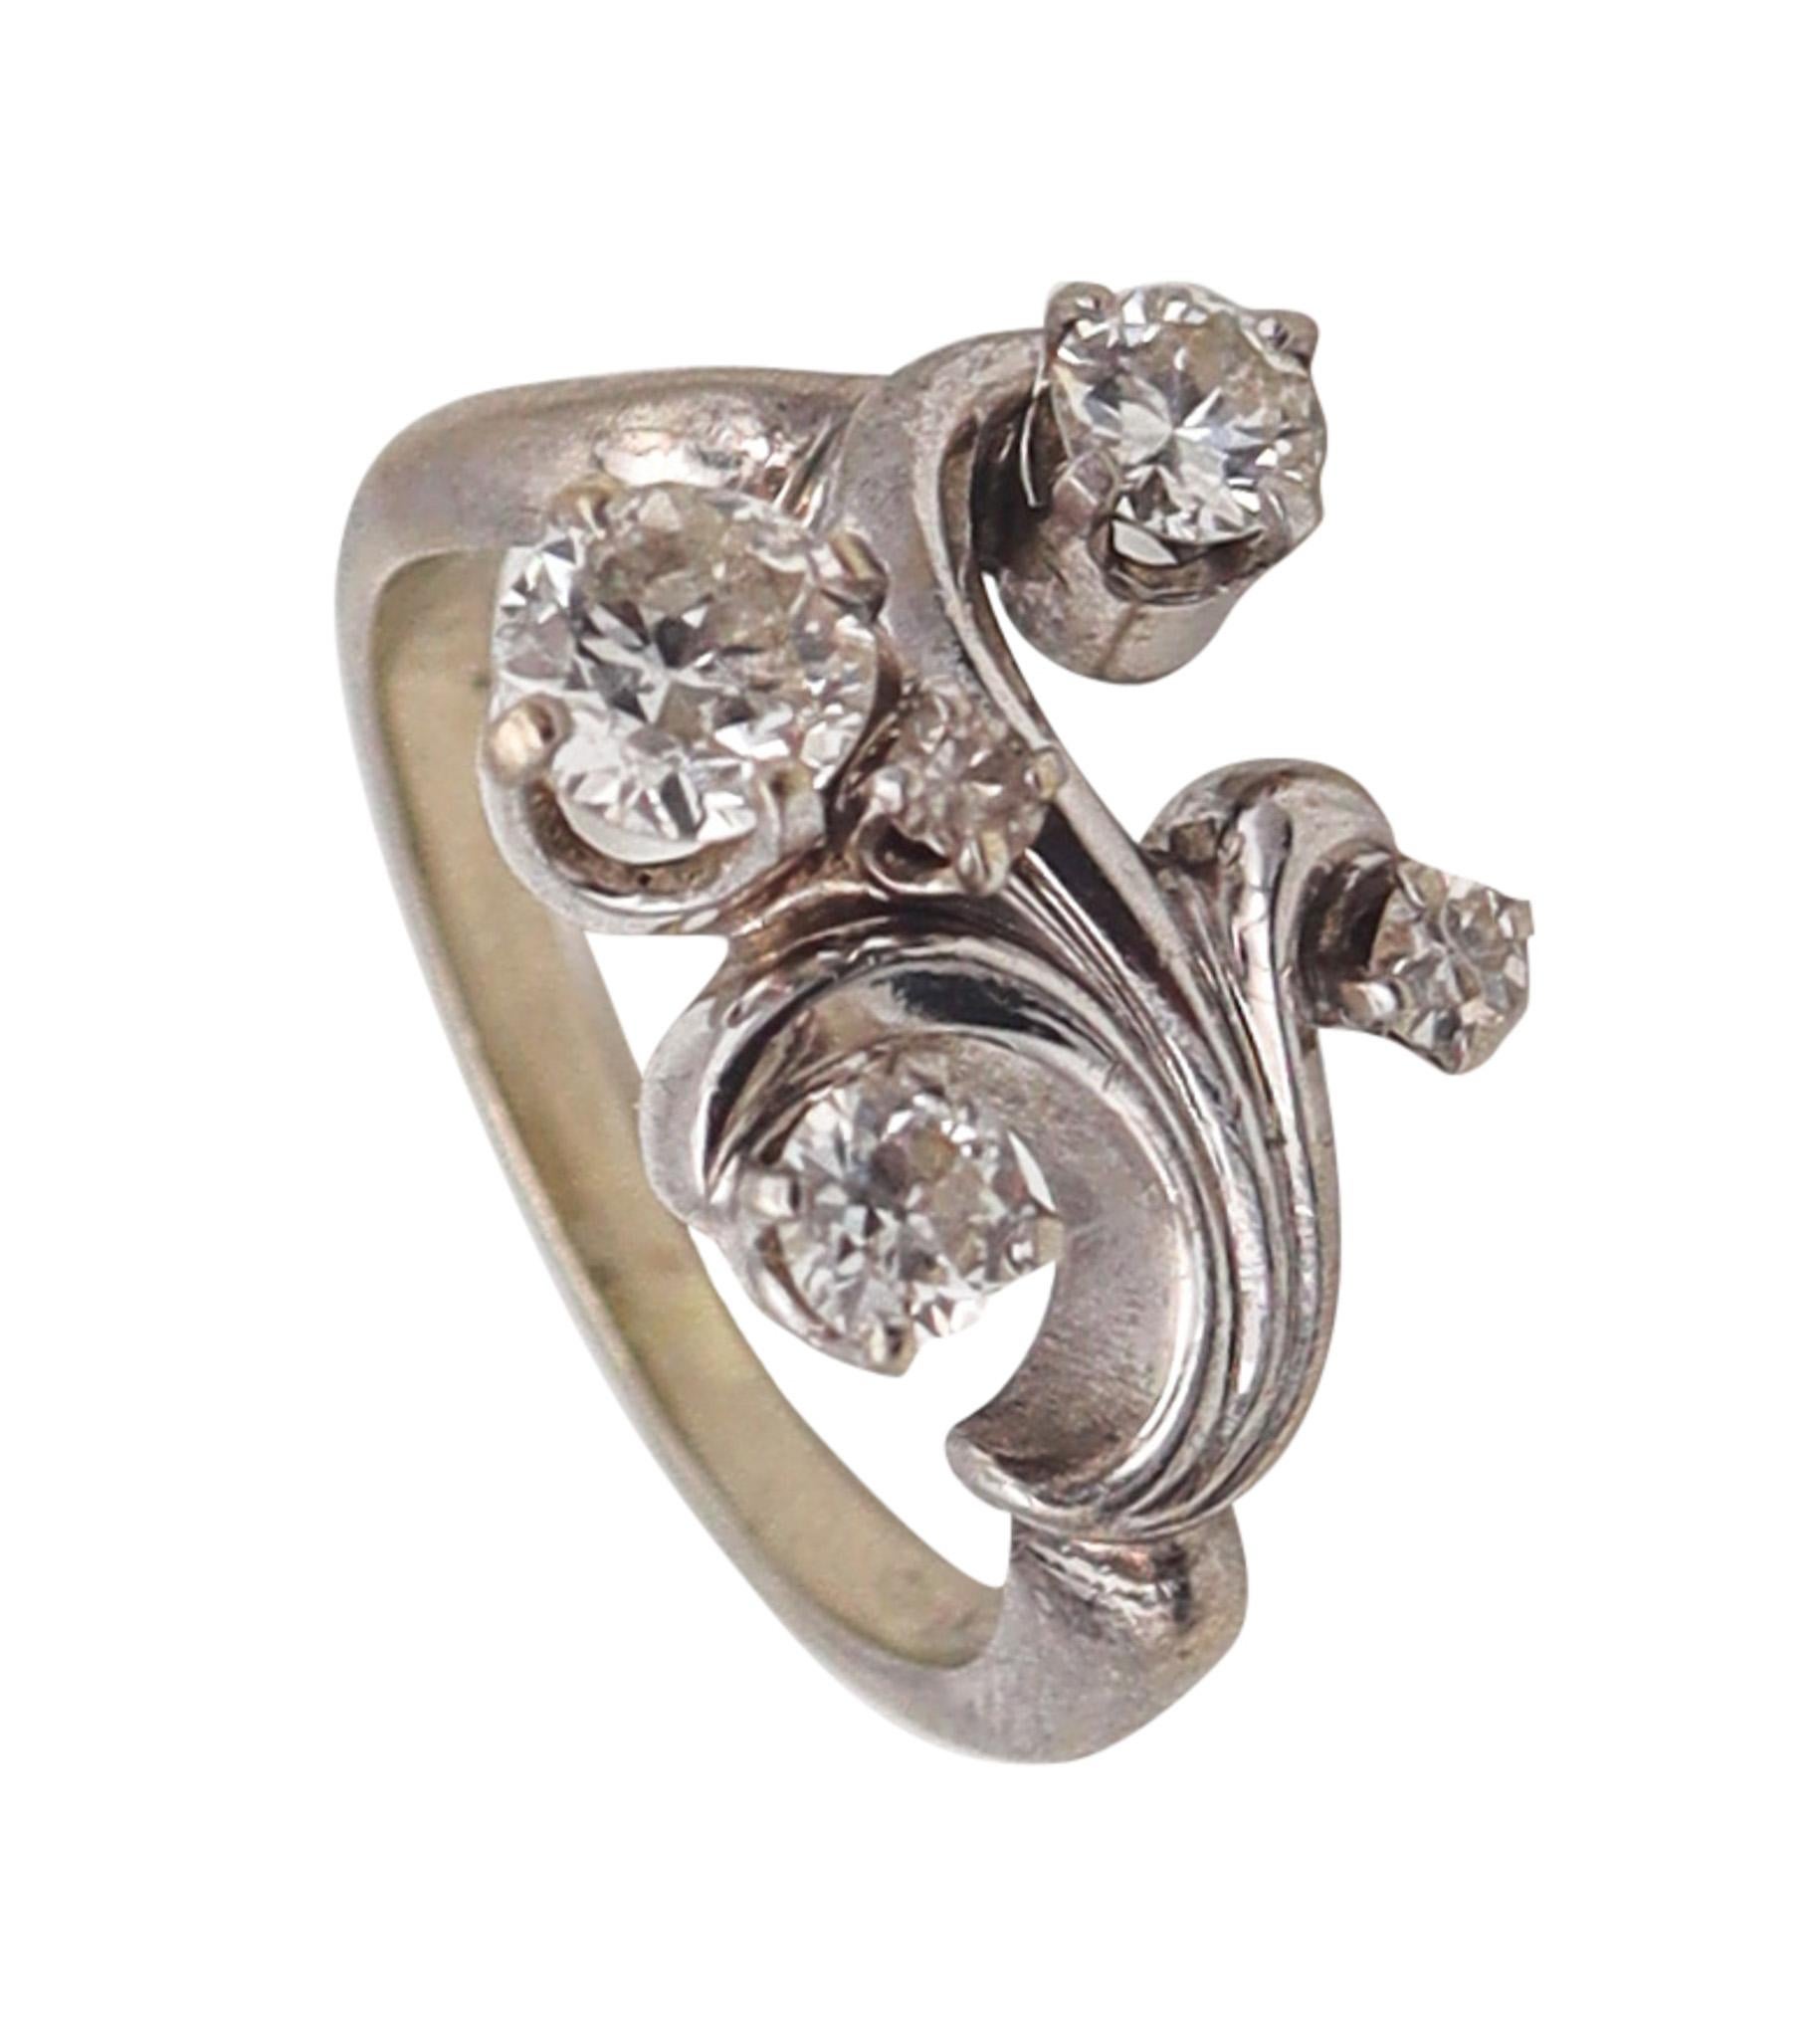 Art Deco Retro 1940 Swirl Ring In Solid 14Kt White Gold With Four White Diamonds For Sale